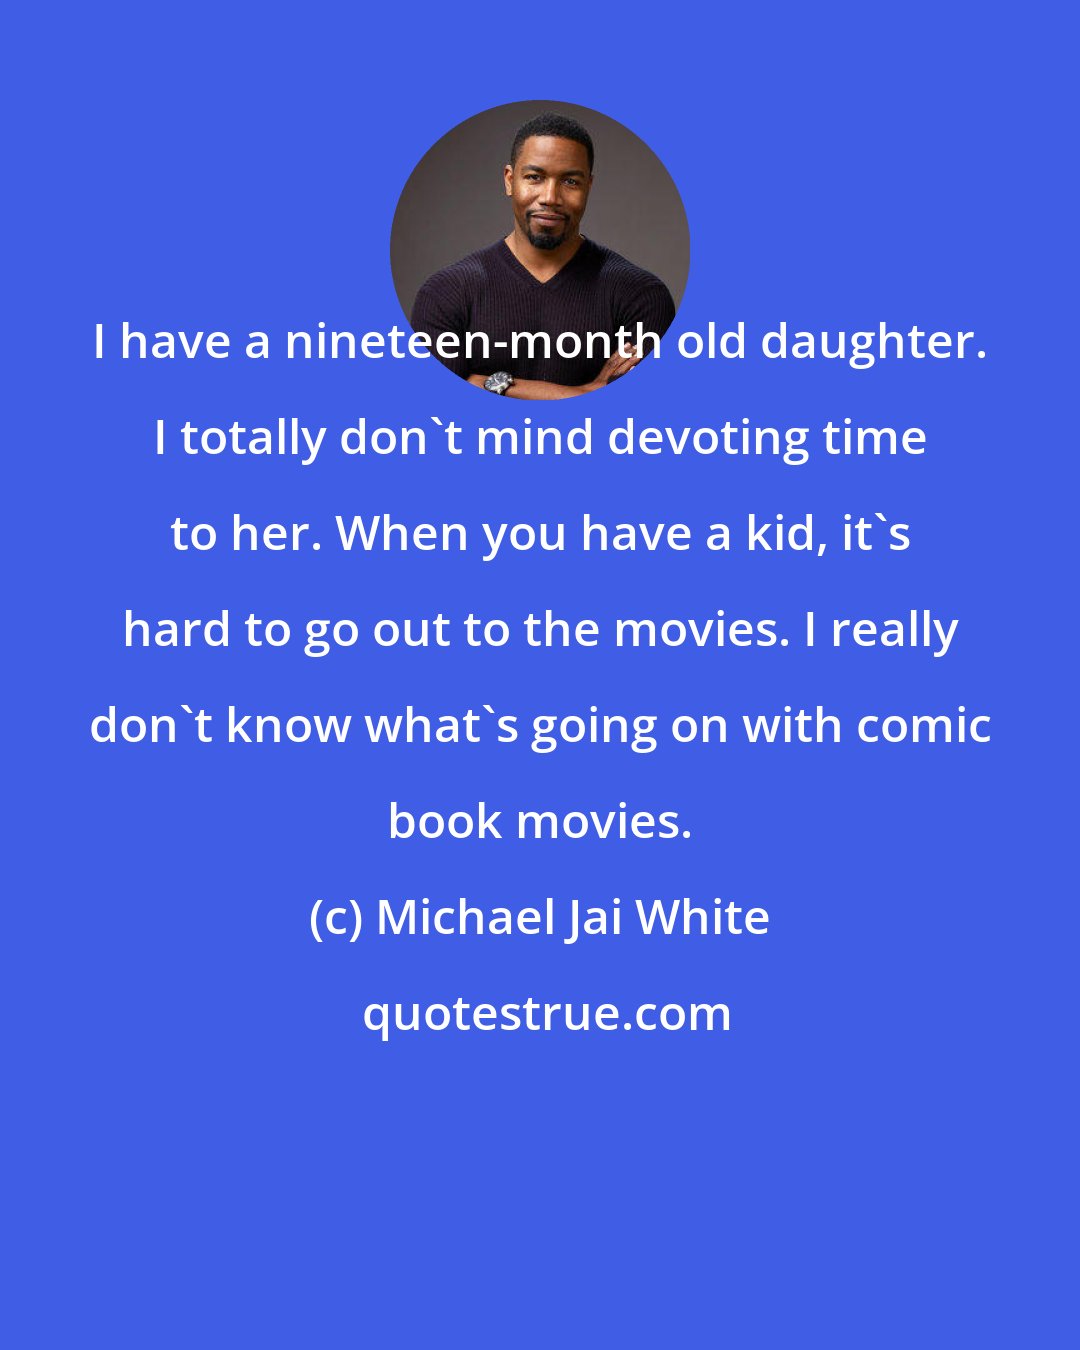 Michael Jai White: I have a nineteen-month old daughter. I totally don't mind devoting time to her. When you have a kid, it's hard to go out to the movies. I really don't know what's going on with comic book movies.